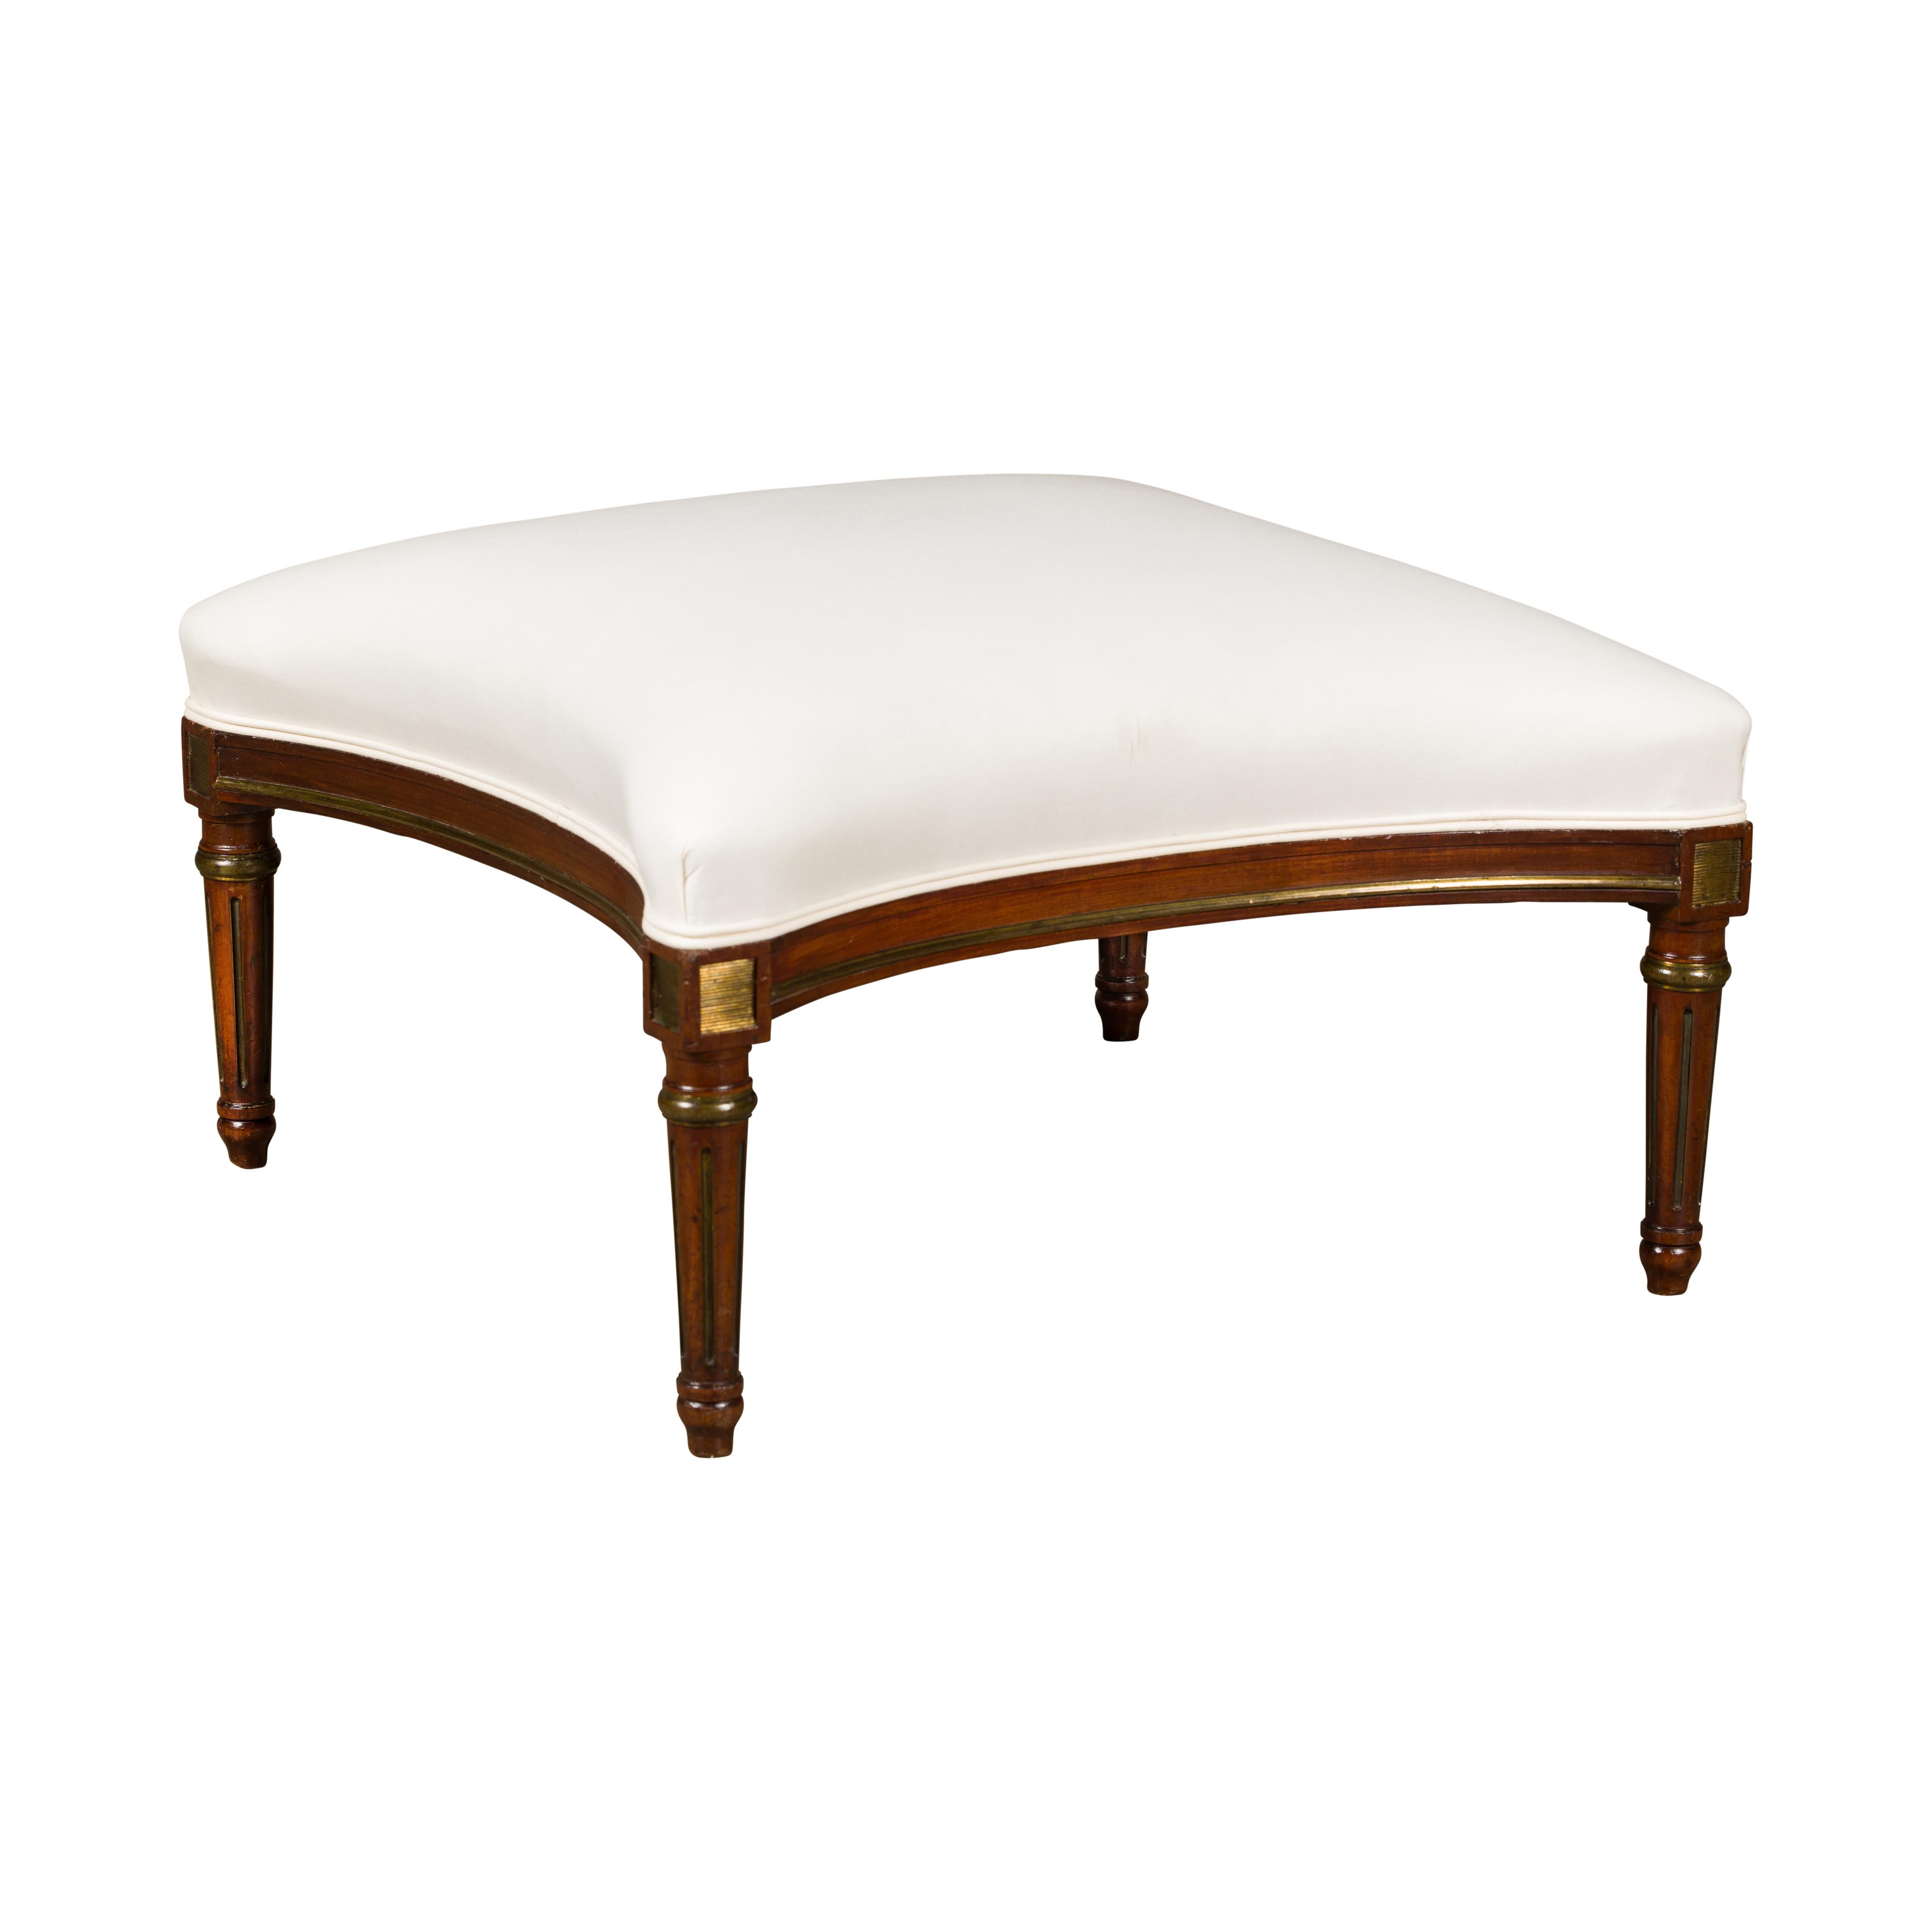 Louis XVI Style French Upholstered Ottoman with Fluted Legs, Gilded Accents For Sale 5